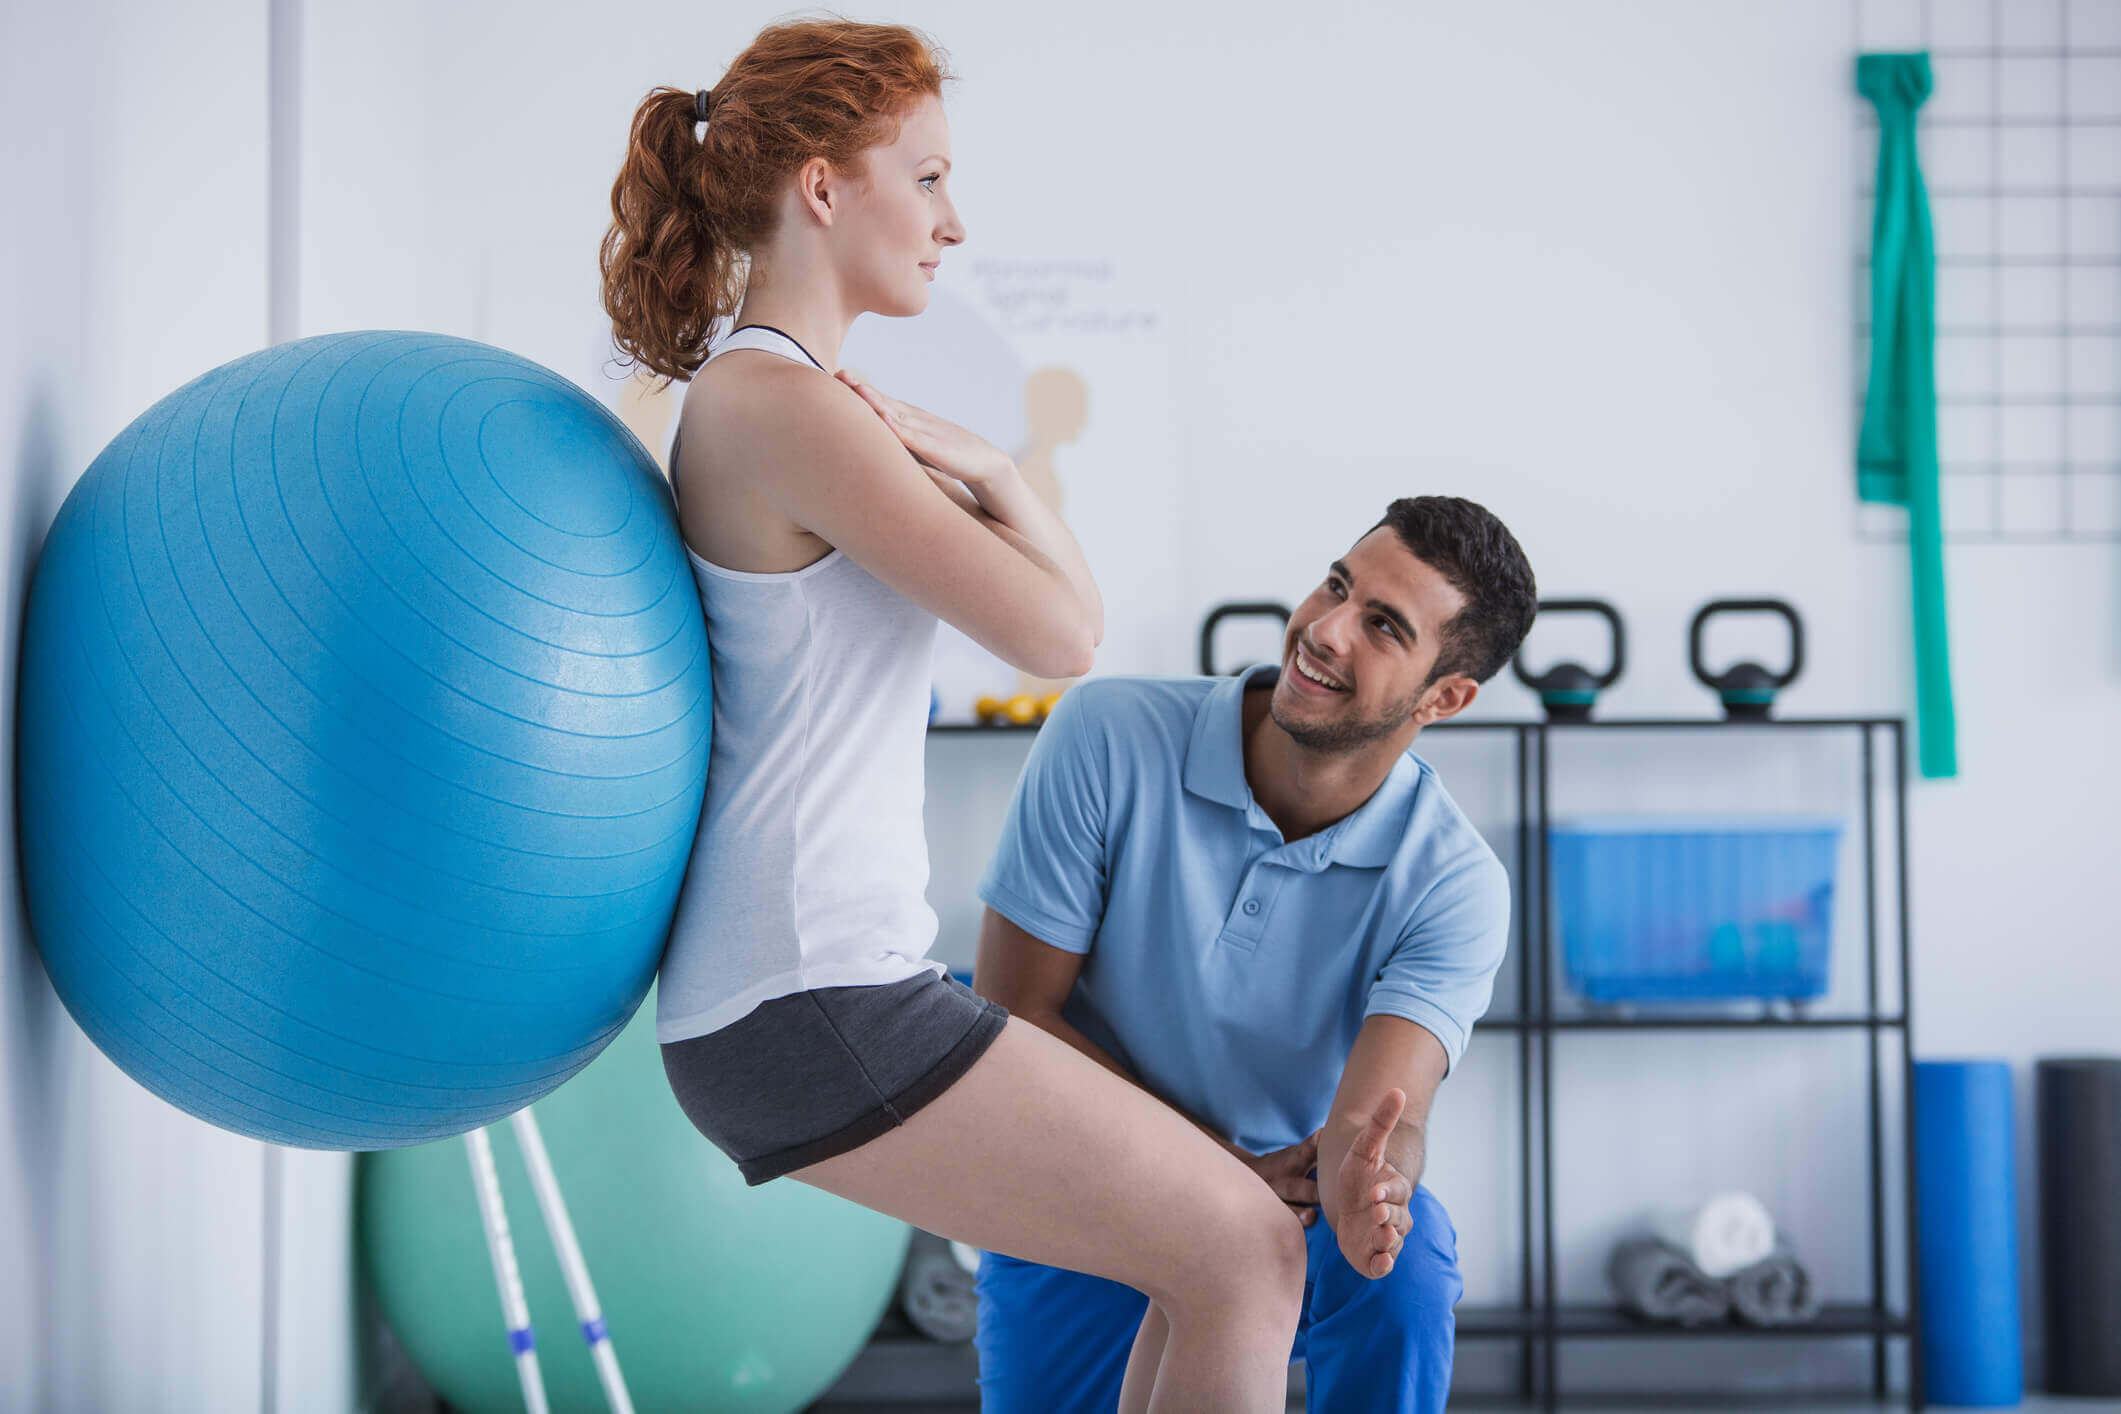 exercise-sterling-physical-therapy-and-wellness-bellaire-tx